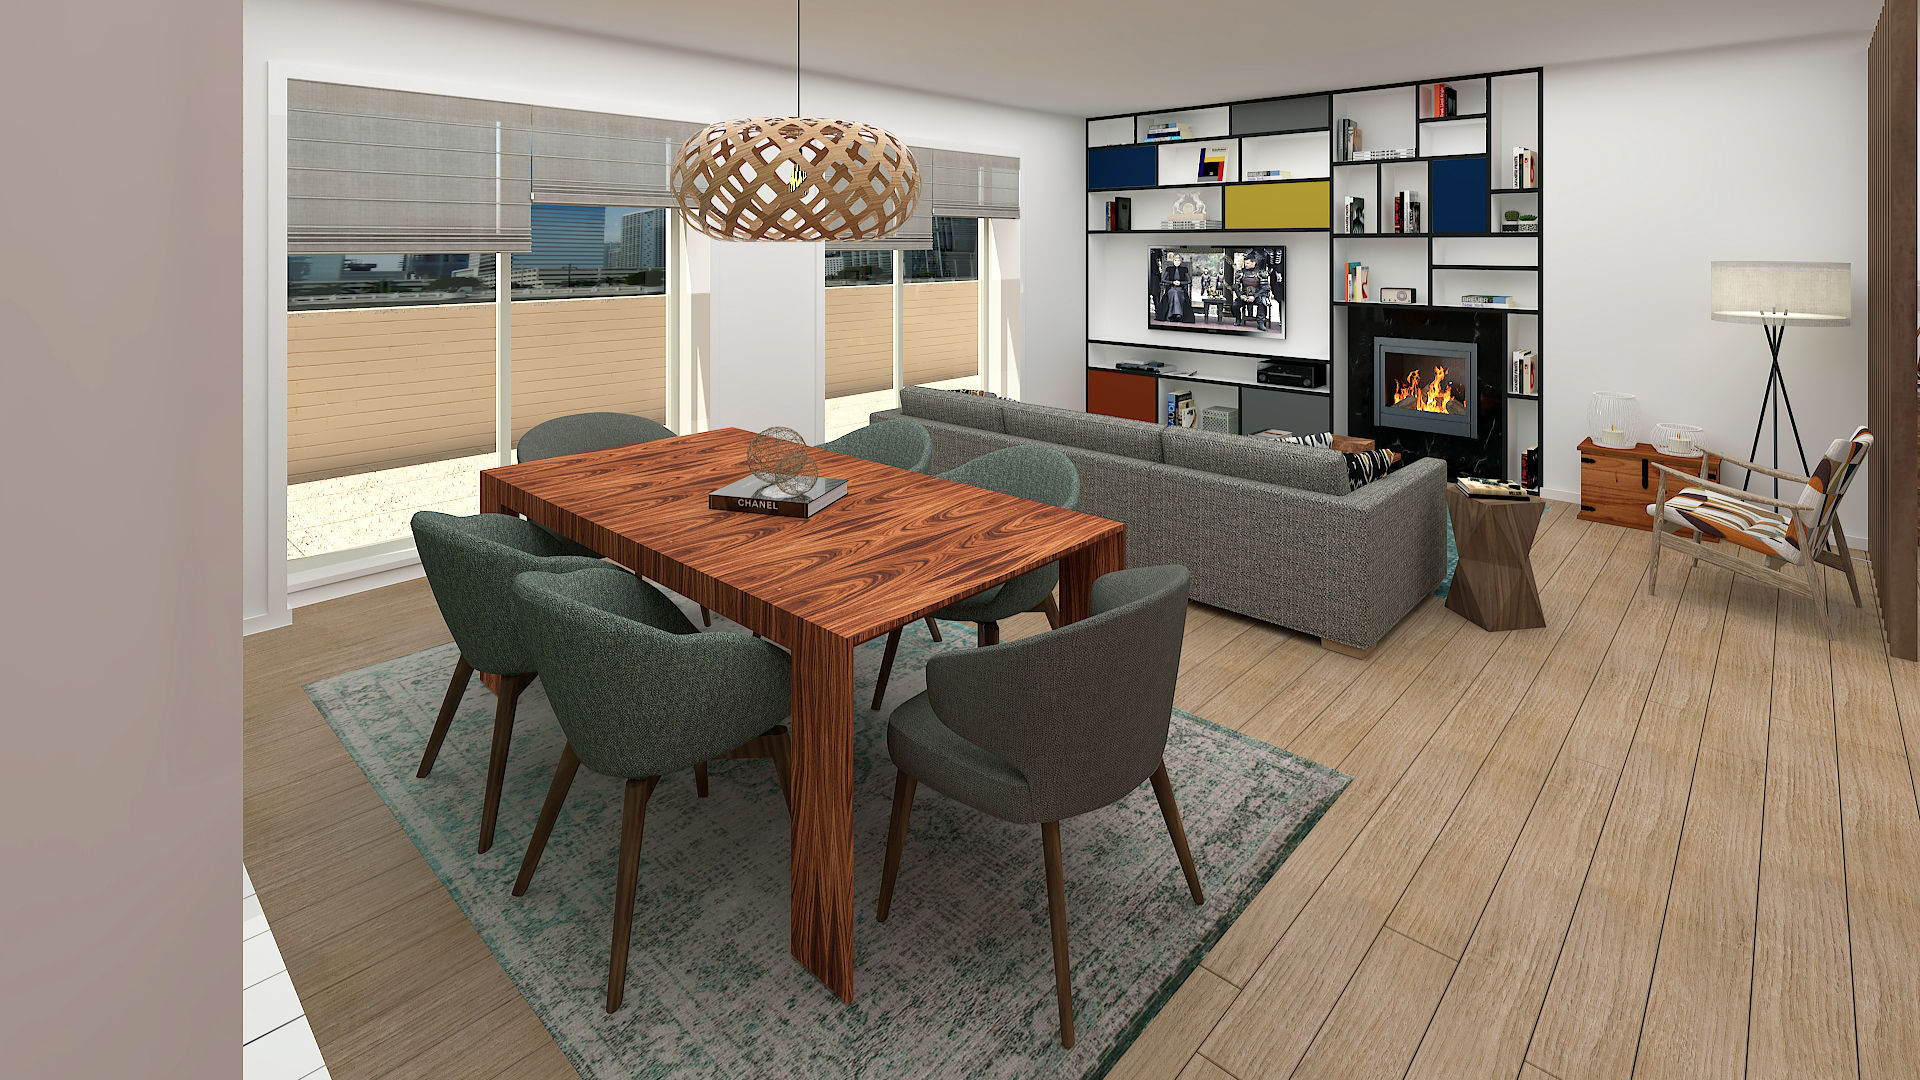 Dining room No Place Like Home ® Modern Yemek Odası dining room,living room,fireplace,ironwood,built-in-bookcase